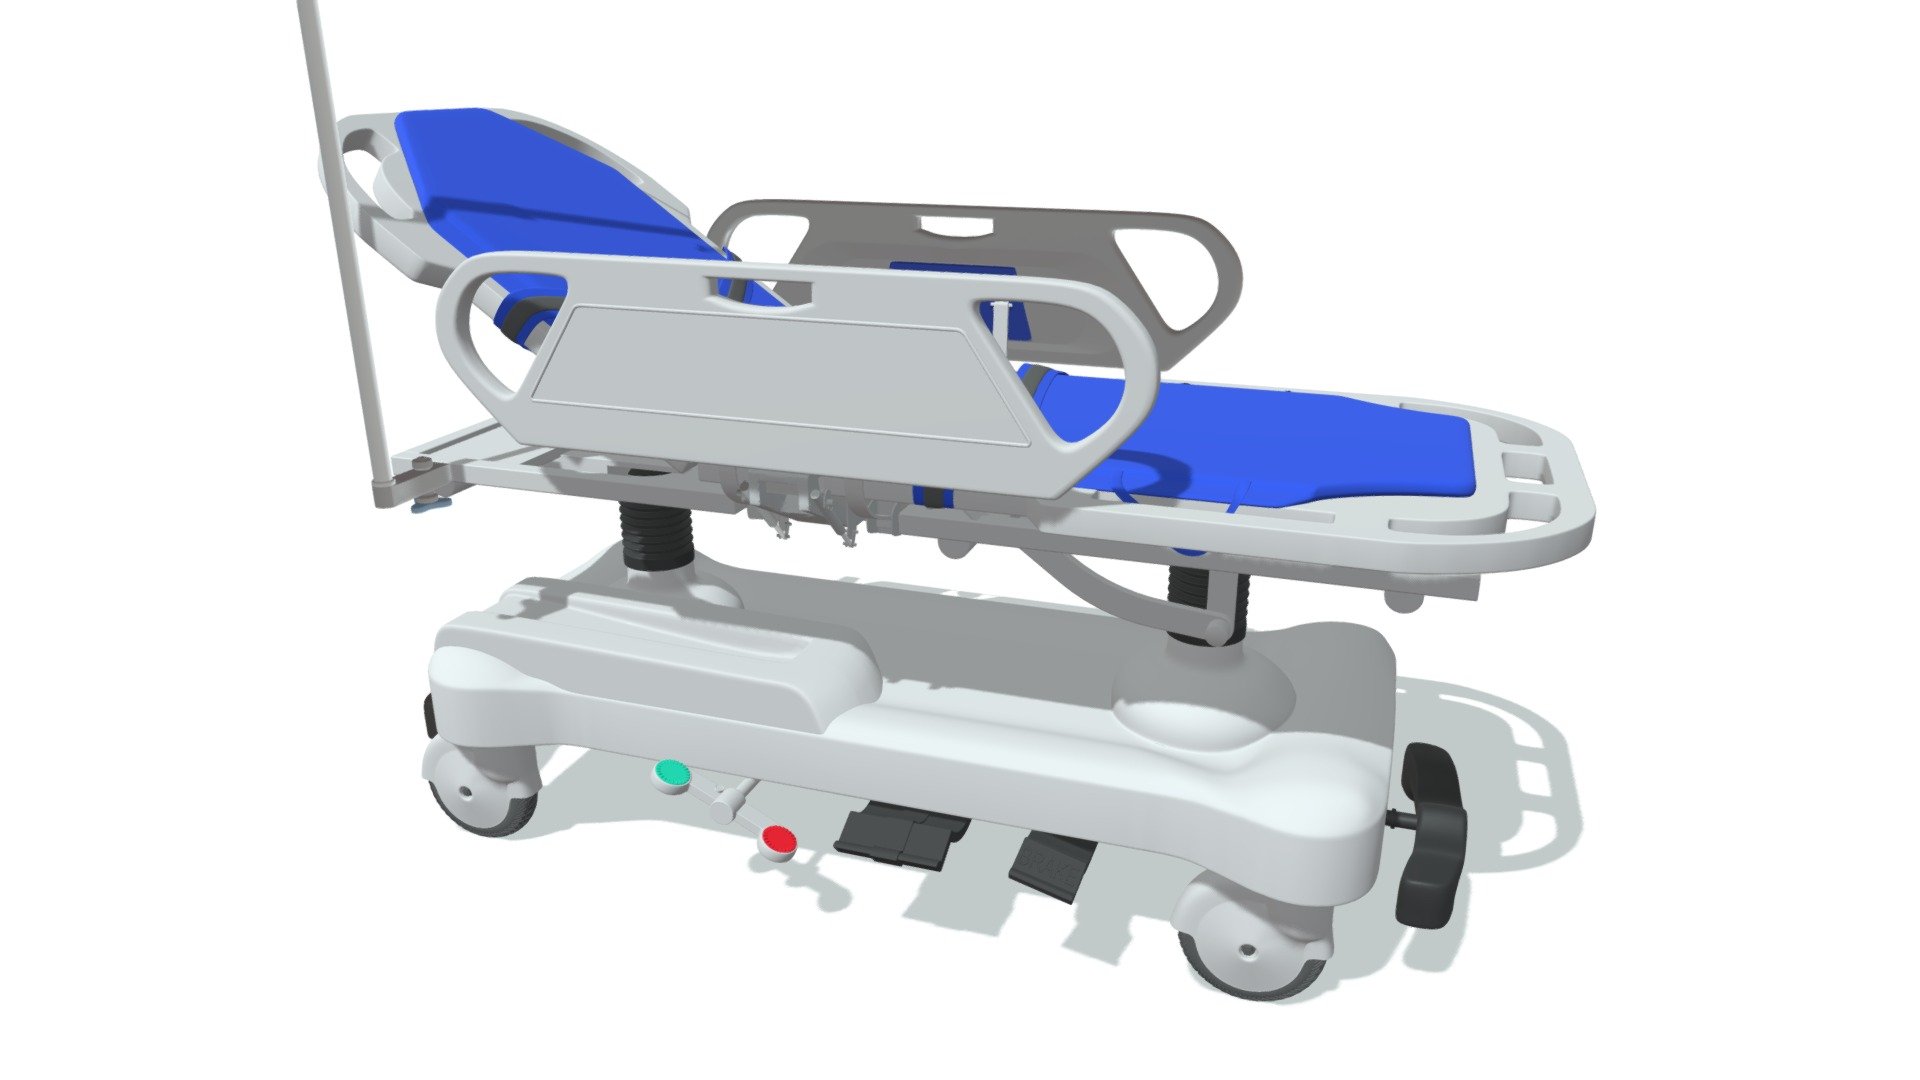 High quality 3d model of ambulance patient transfer stretcher trolley 3d model